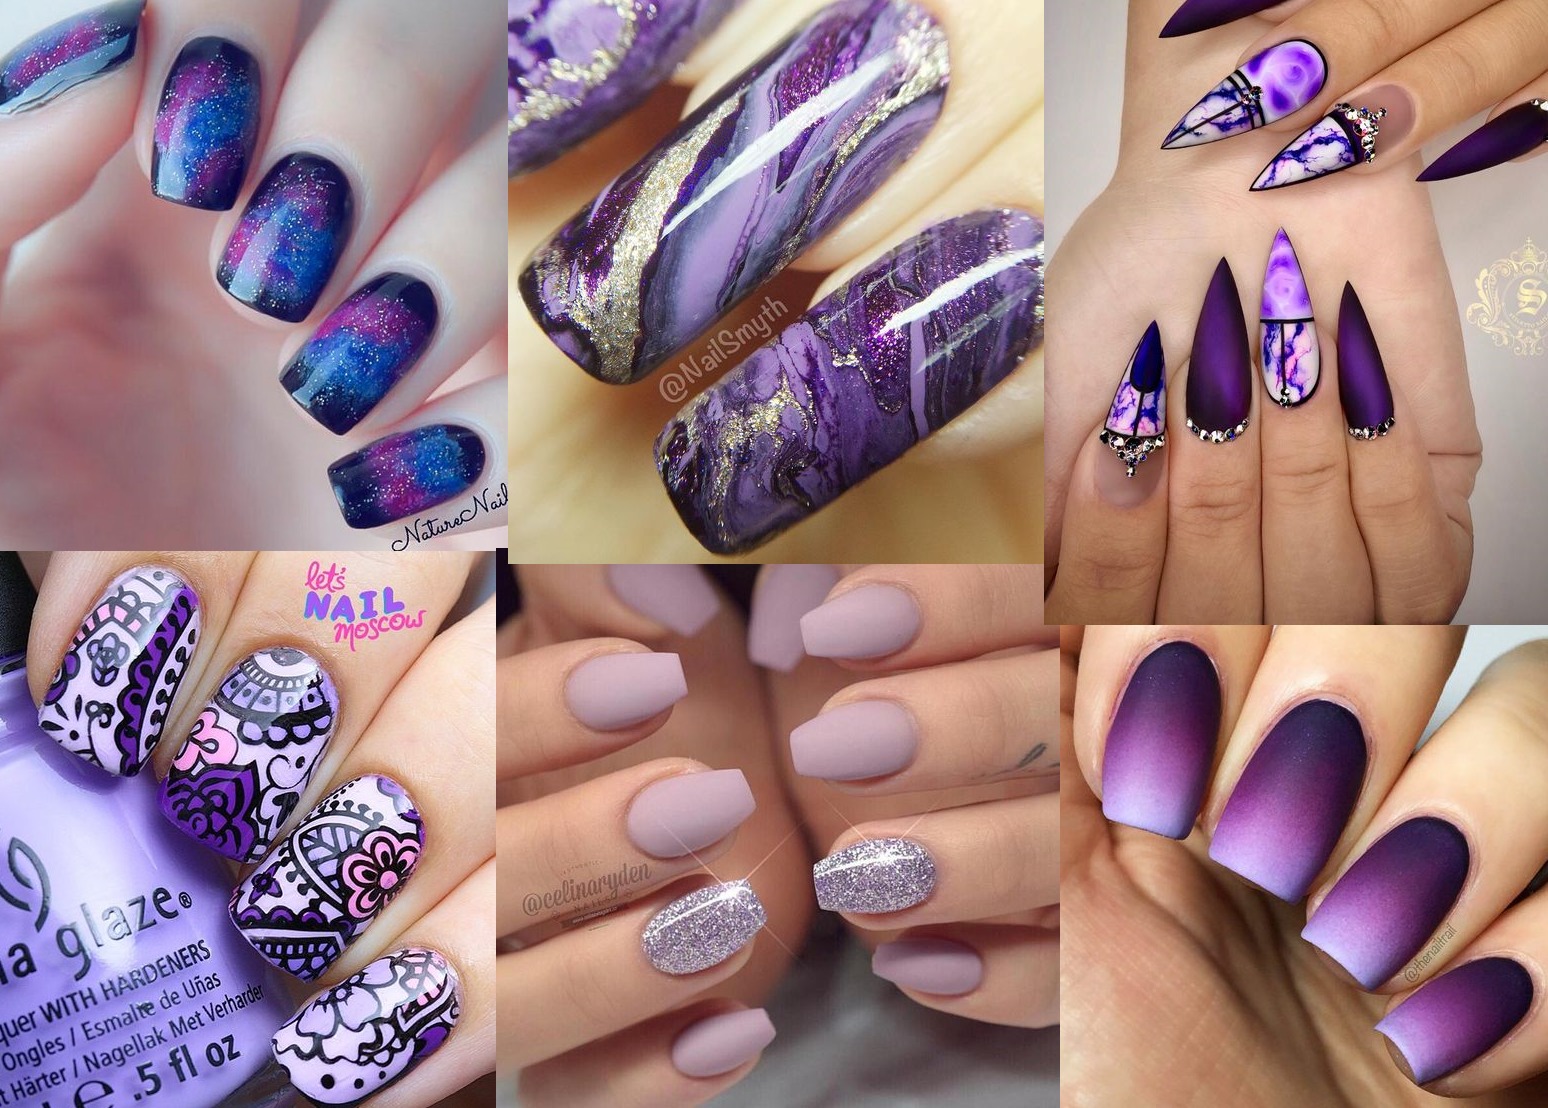 1. "10 Fall Nail Ideas That Will Make You Want to Book a Manicure ASAP" - wide 4